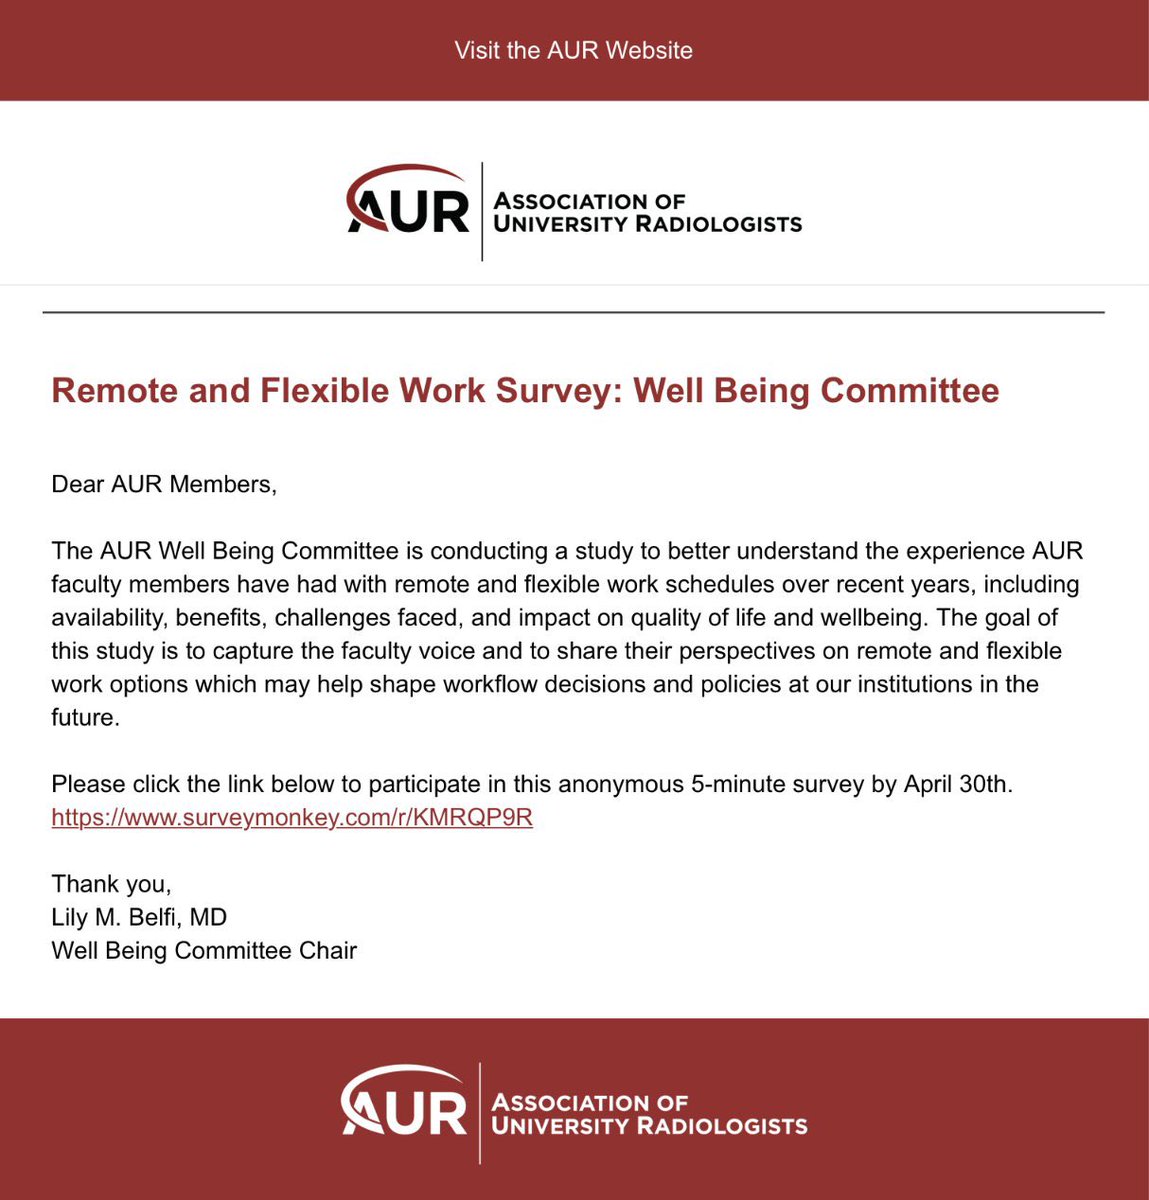 AUR Members! Have you had any experience with remote or flexible work schedules? The @AurWellBeing Committee wants to hear from you! Please fill out this anonymous 3 minute survey: surveymonkey.com/r/KMRQP9R @AURtweet @ACER_AUR @AMSERRads #AUR24